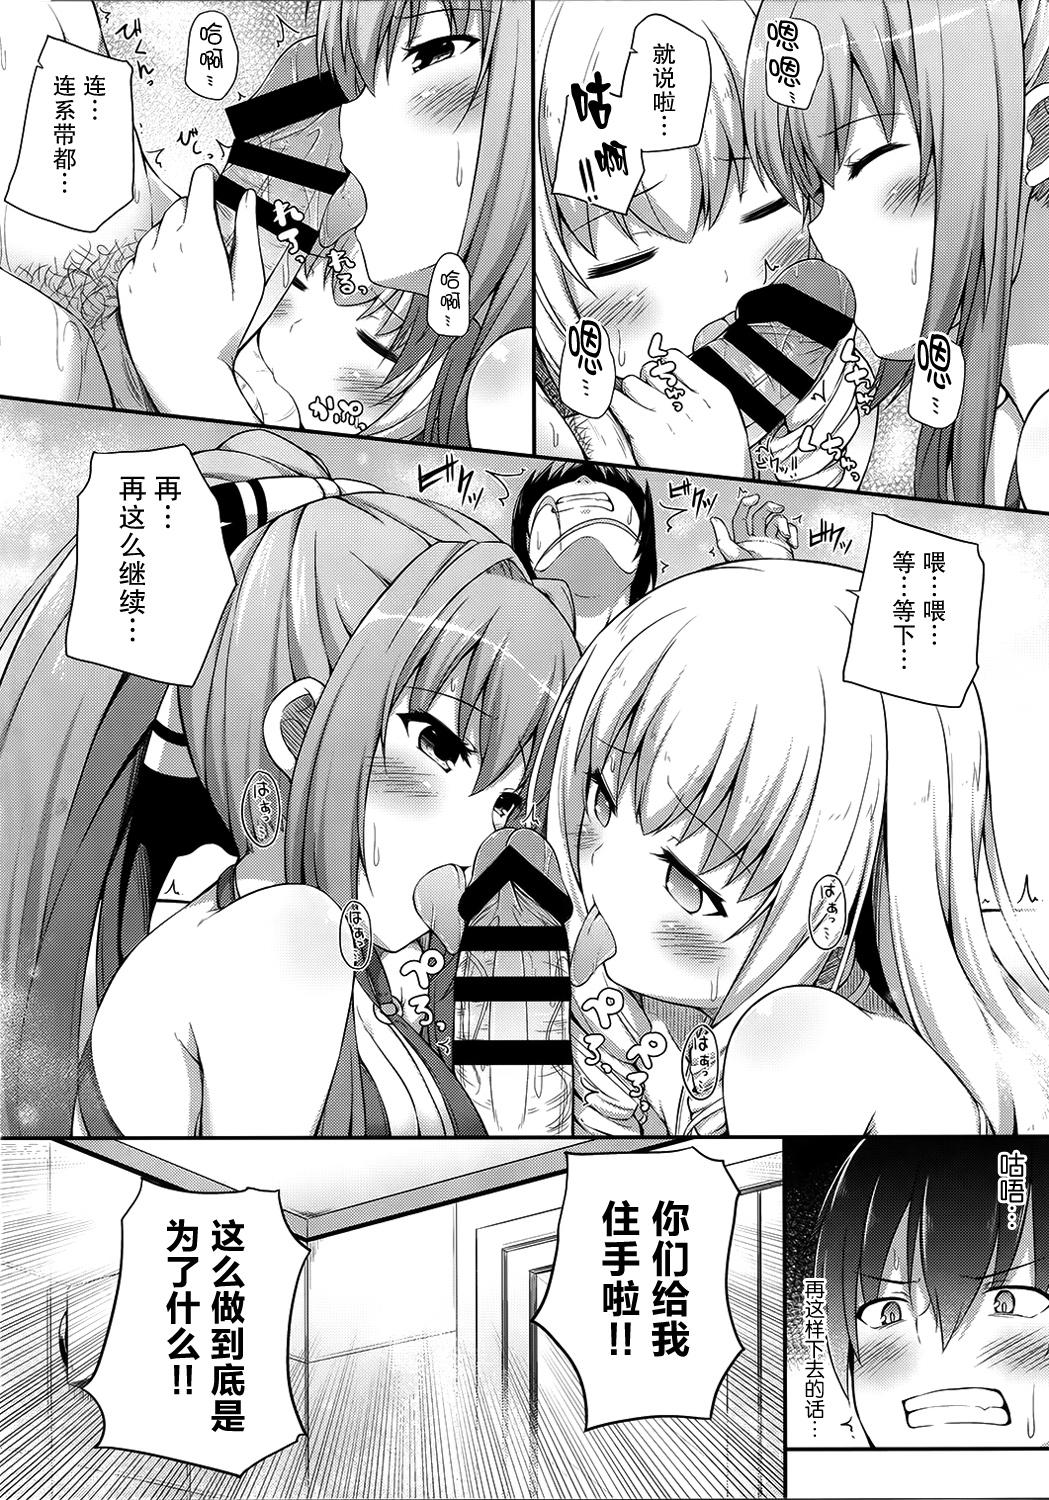 Best Blow Jobs Ever Brilliant Holiday - Amagi brilliant park Onlyfans - Page 9